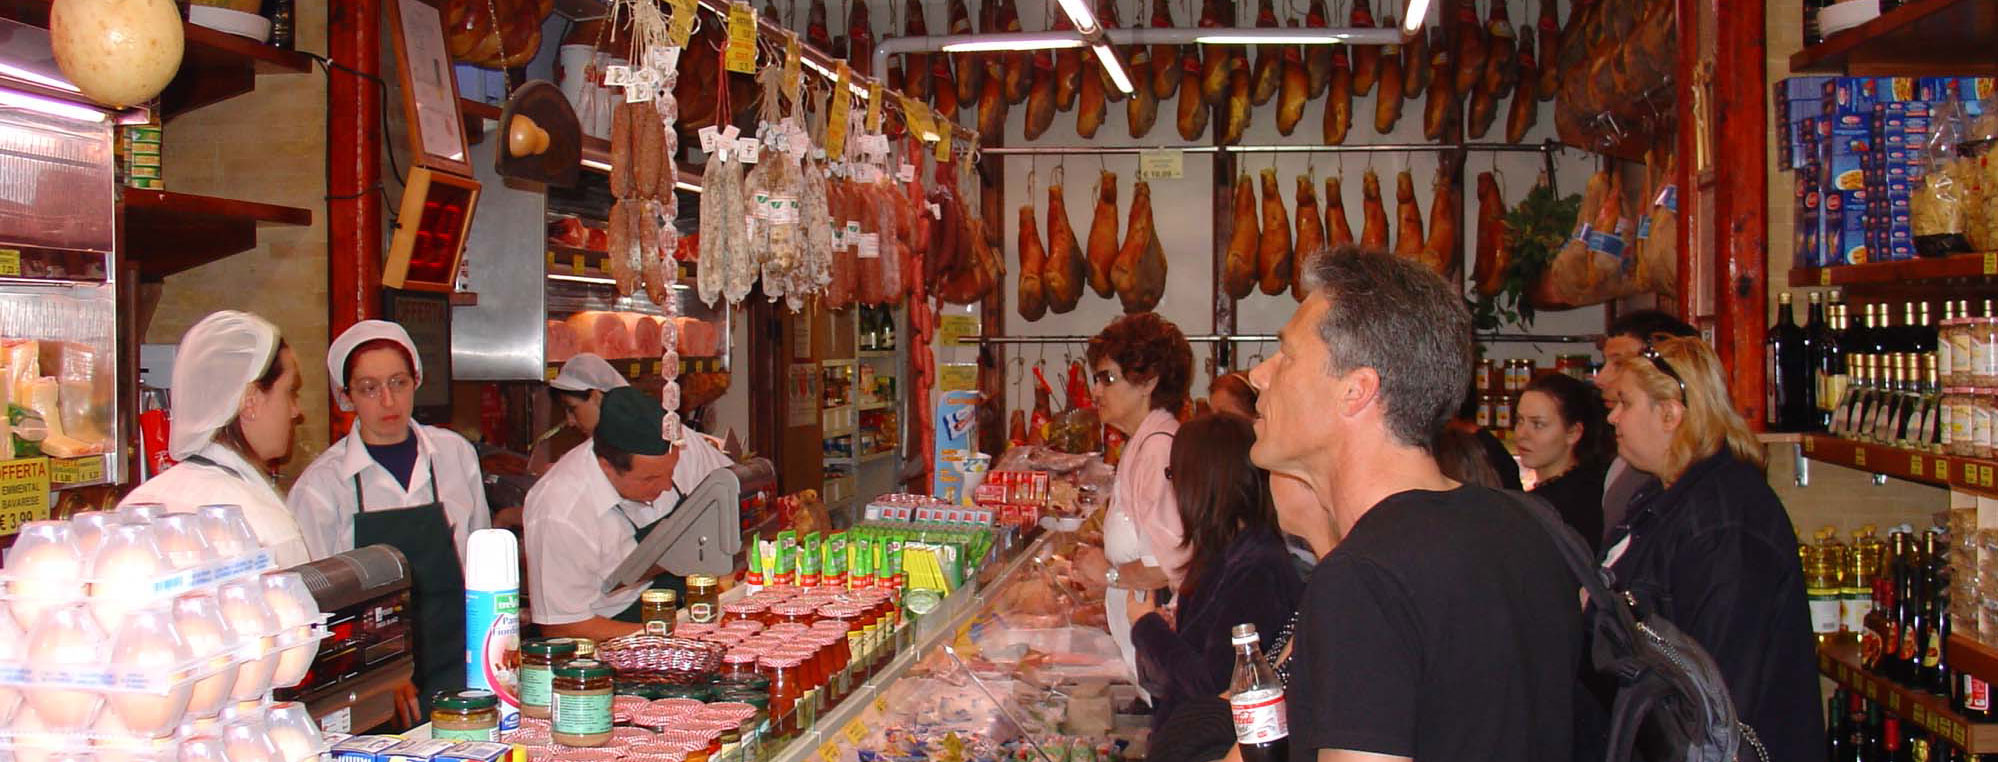 Cooking classes with visit to local markets in Marche Italy